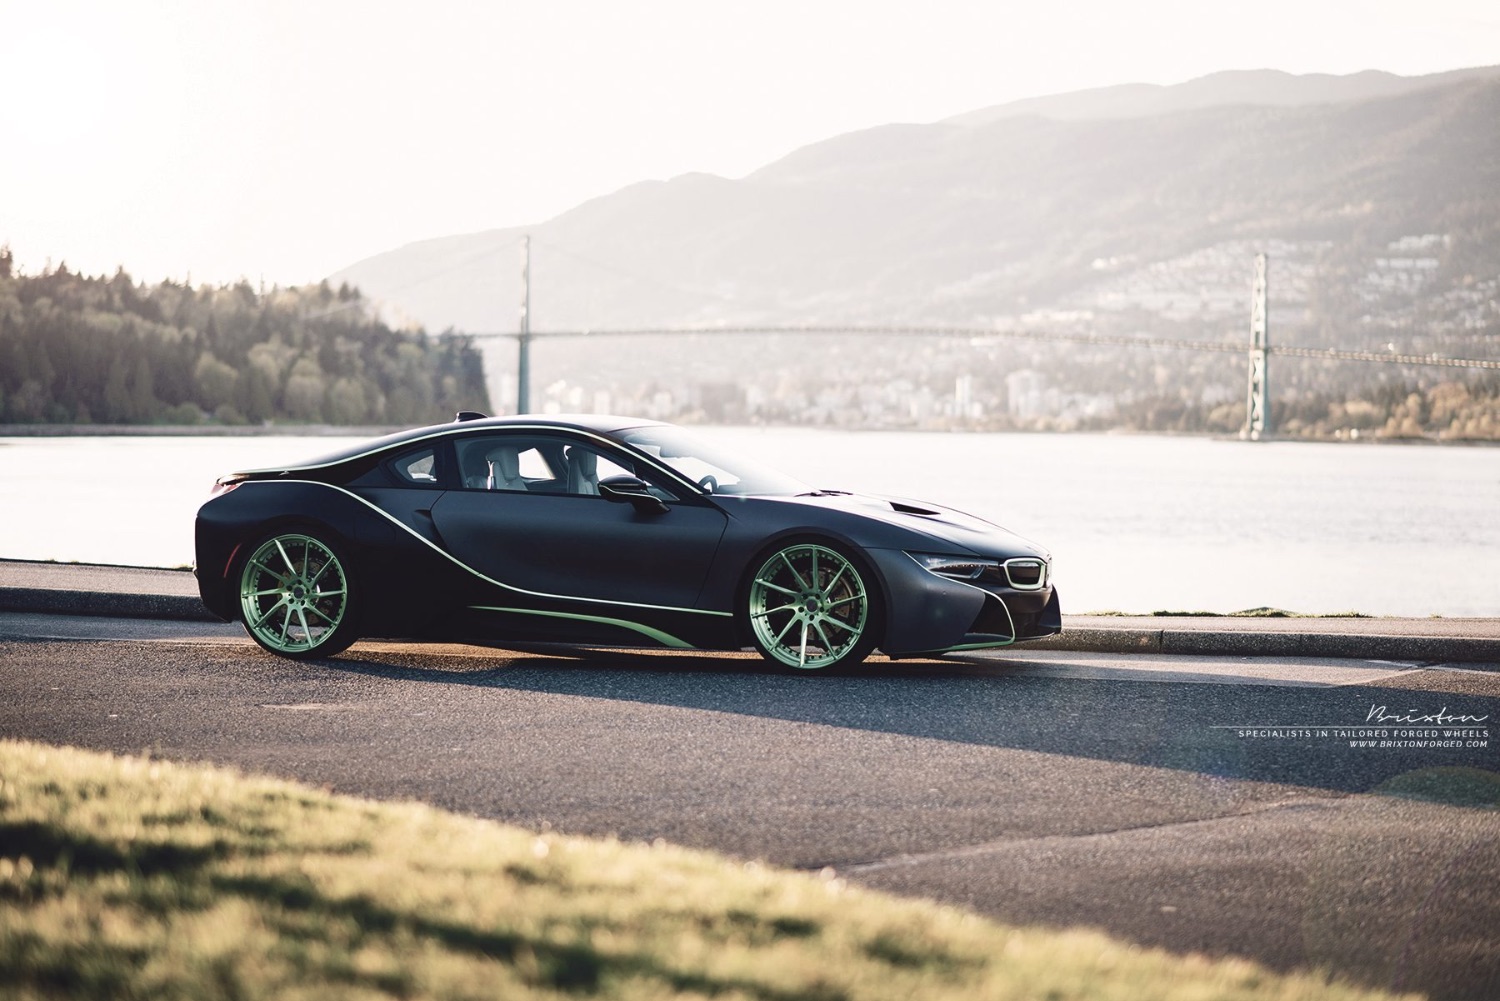 brixton-forged-black-bmw-i8-brixton-forged-r10d-duo-series-2-piece-forged-wheels-concave-green-04-1800x1202